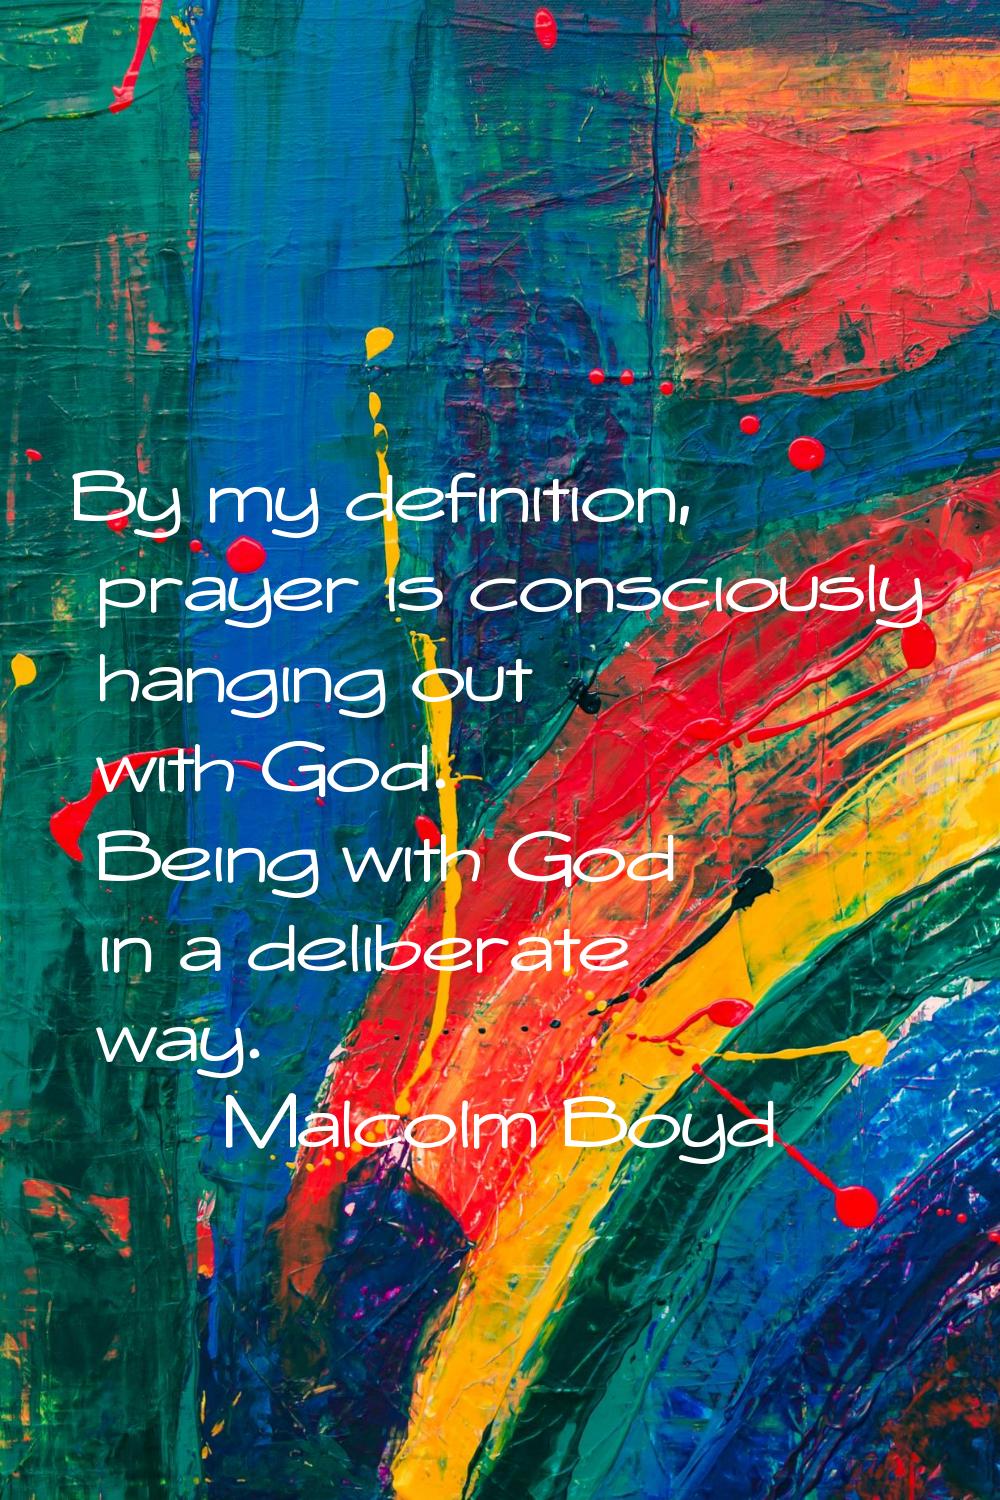 By my definition, prayer is consciously hanging out with God. Being with God in a deliberate way.